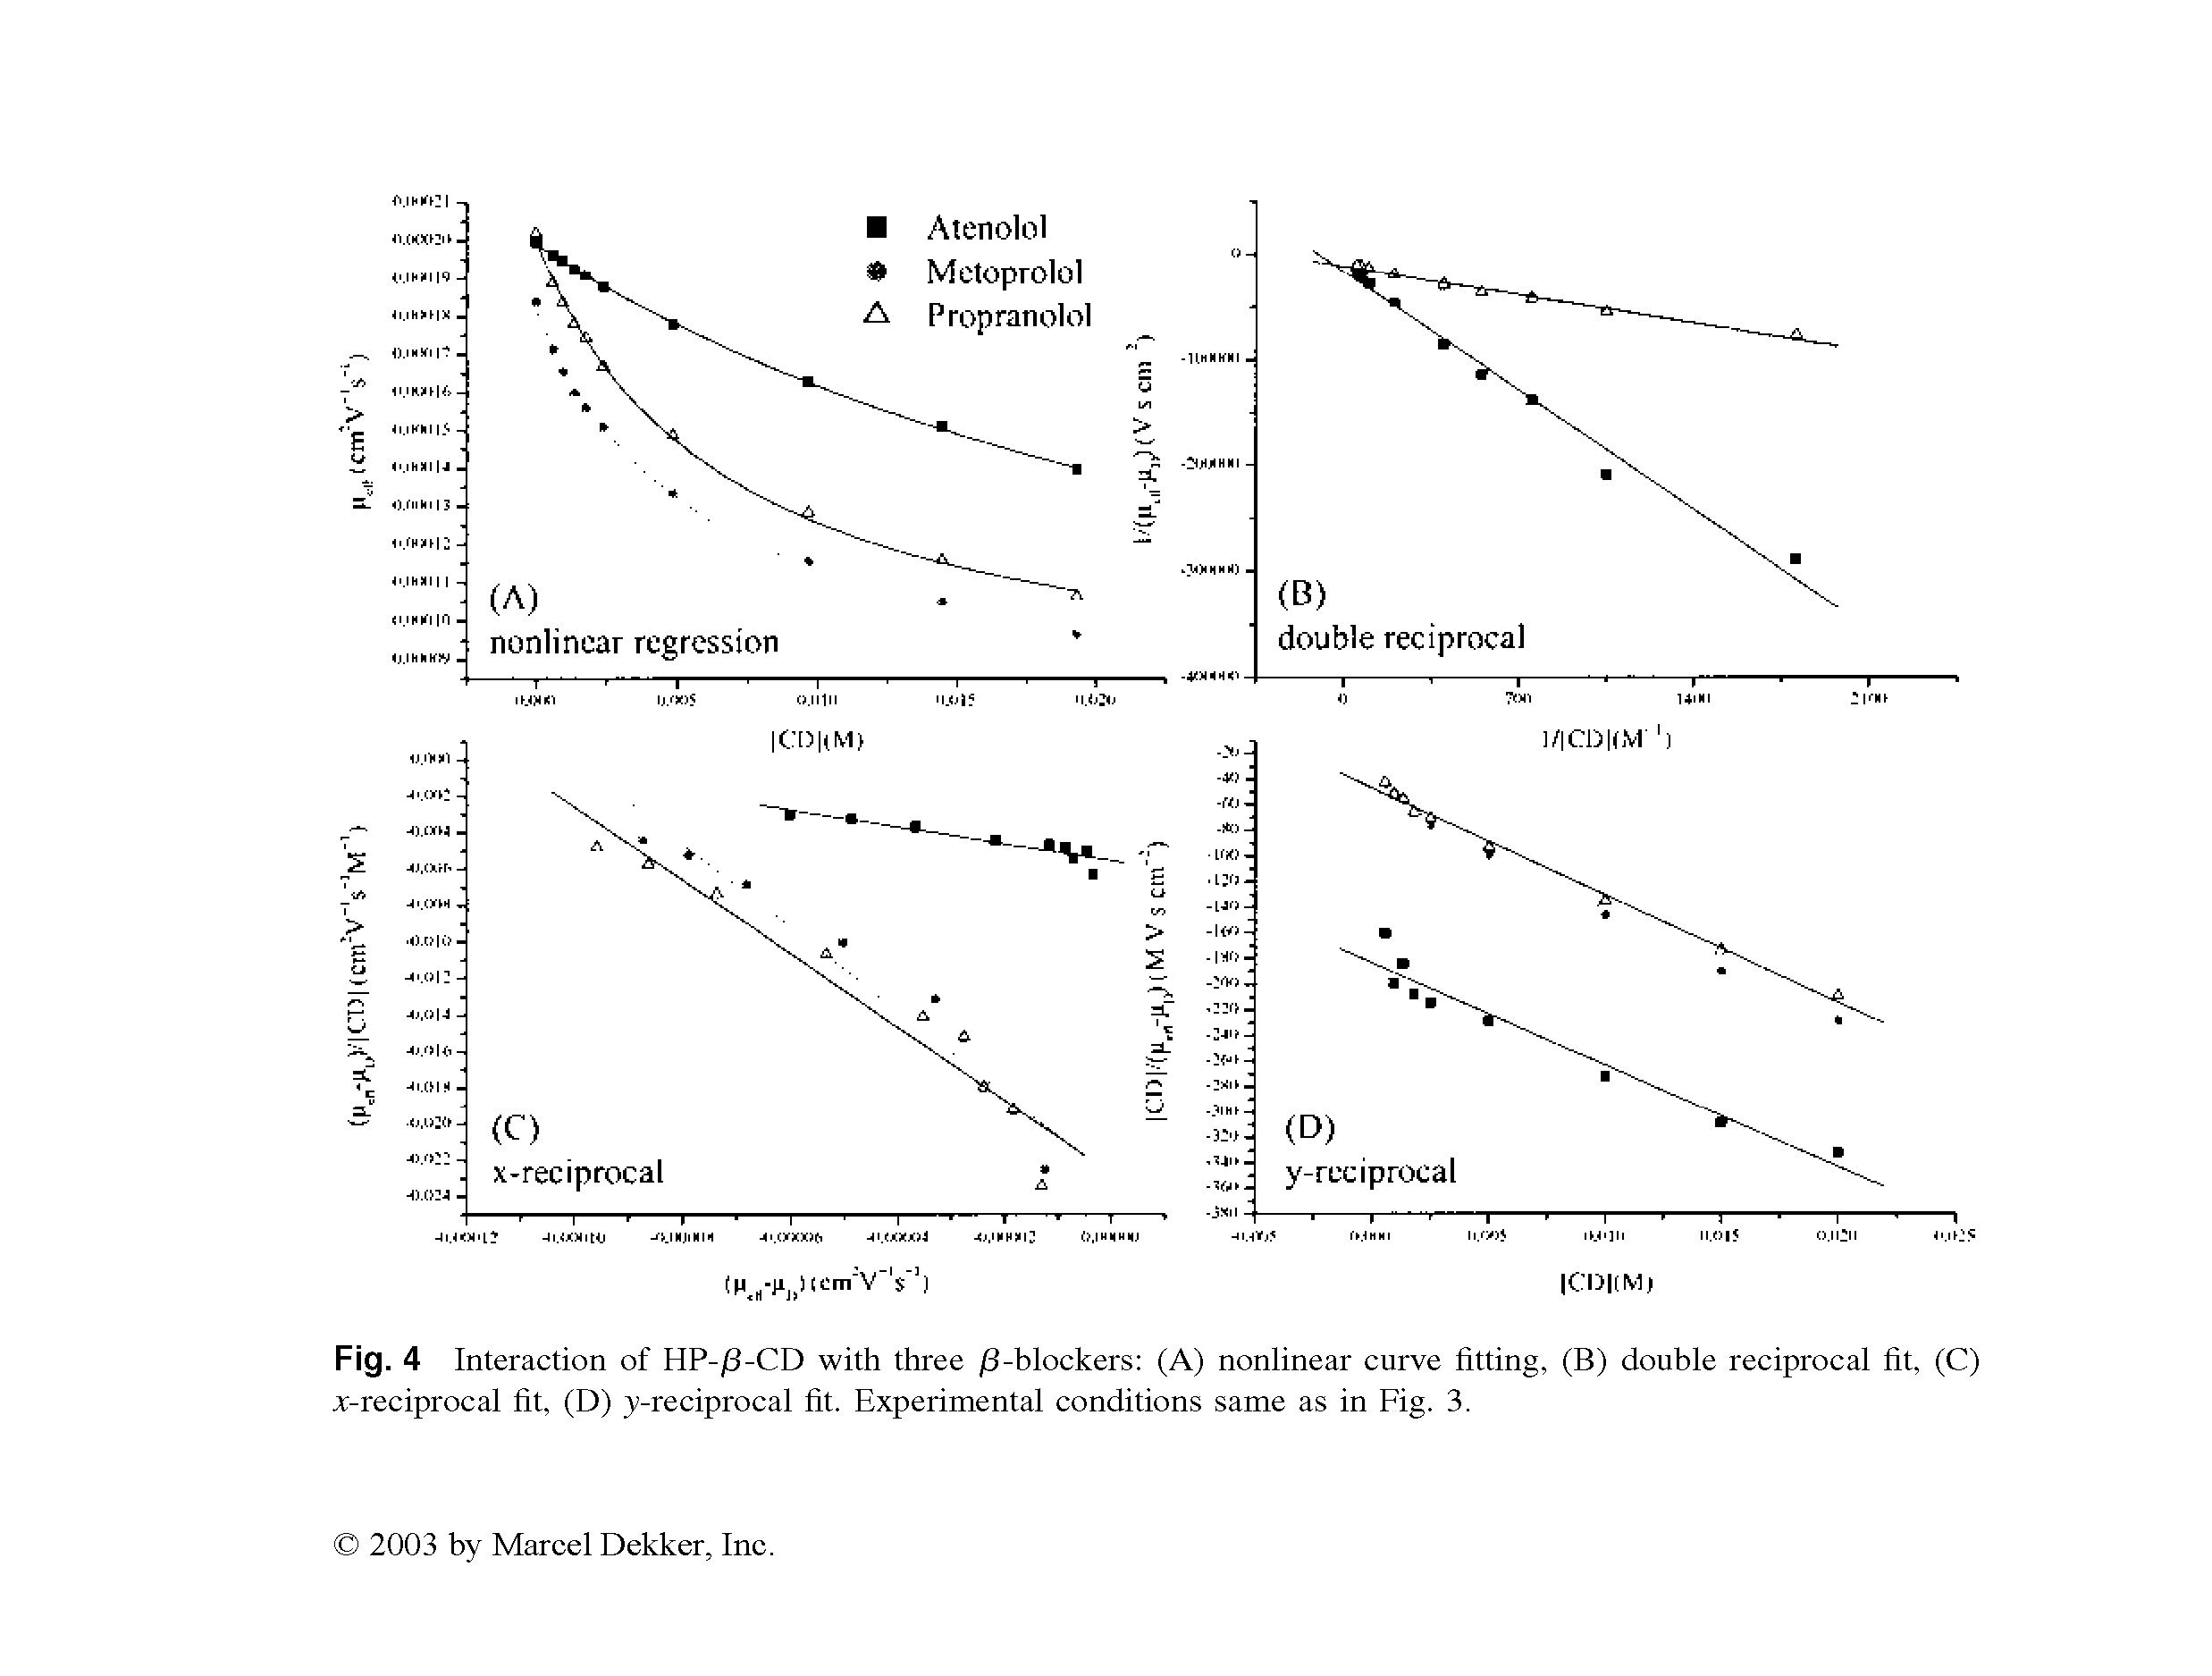 Fig. 4 Interaction of HP-/3-CD with three /3-blockers (A) nonlinear curve fitting, (B) double reciprocal fit, (C) x-reciprocal fit, (D) y-reciprocal fit. Experimental conditions same as in Fig. 3.